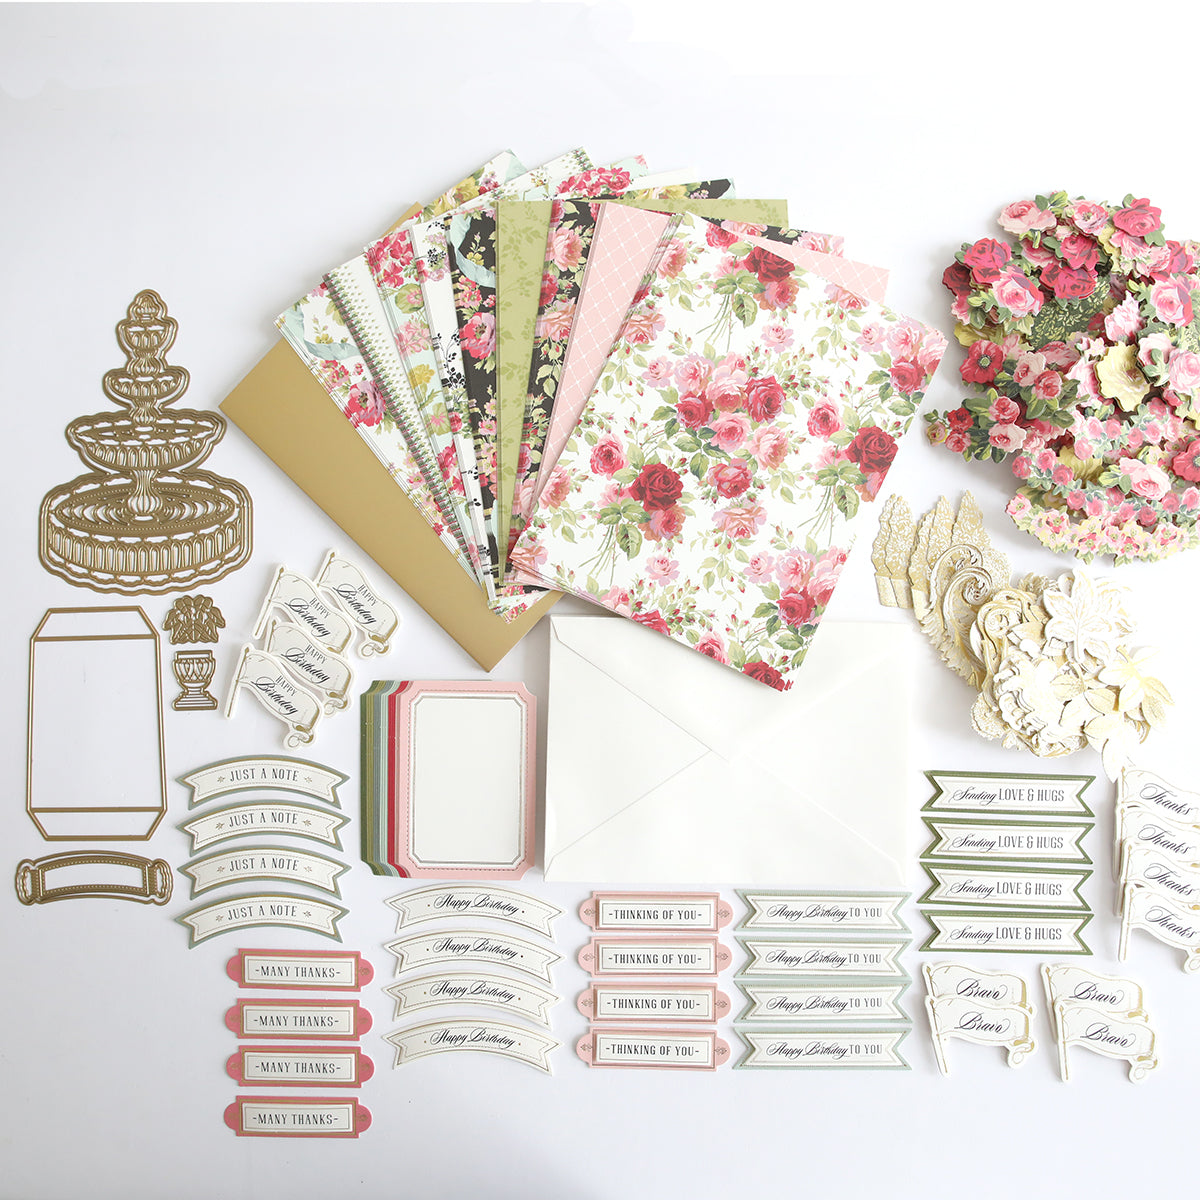 An Anna Griffin craft box filled with a collection of interactive Garden Fountain Easel Finishing School Kit cards, papers, and flowers for creative enthusiasts.